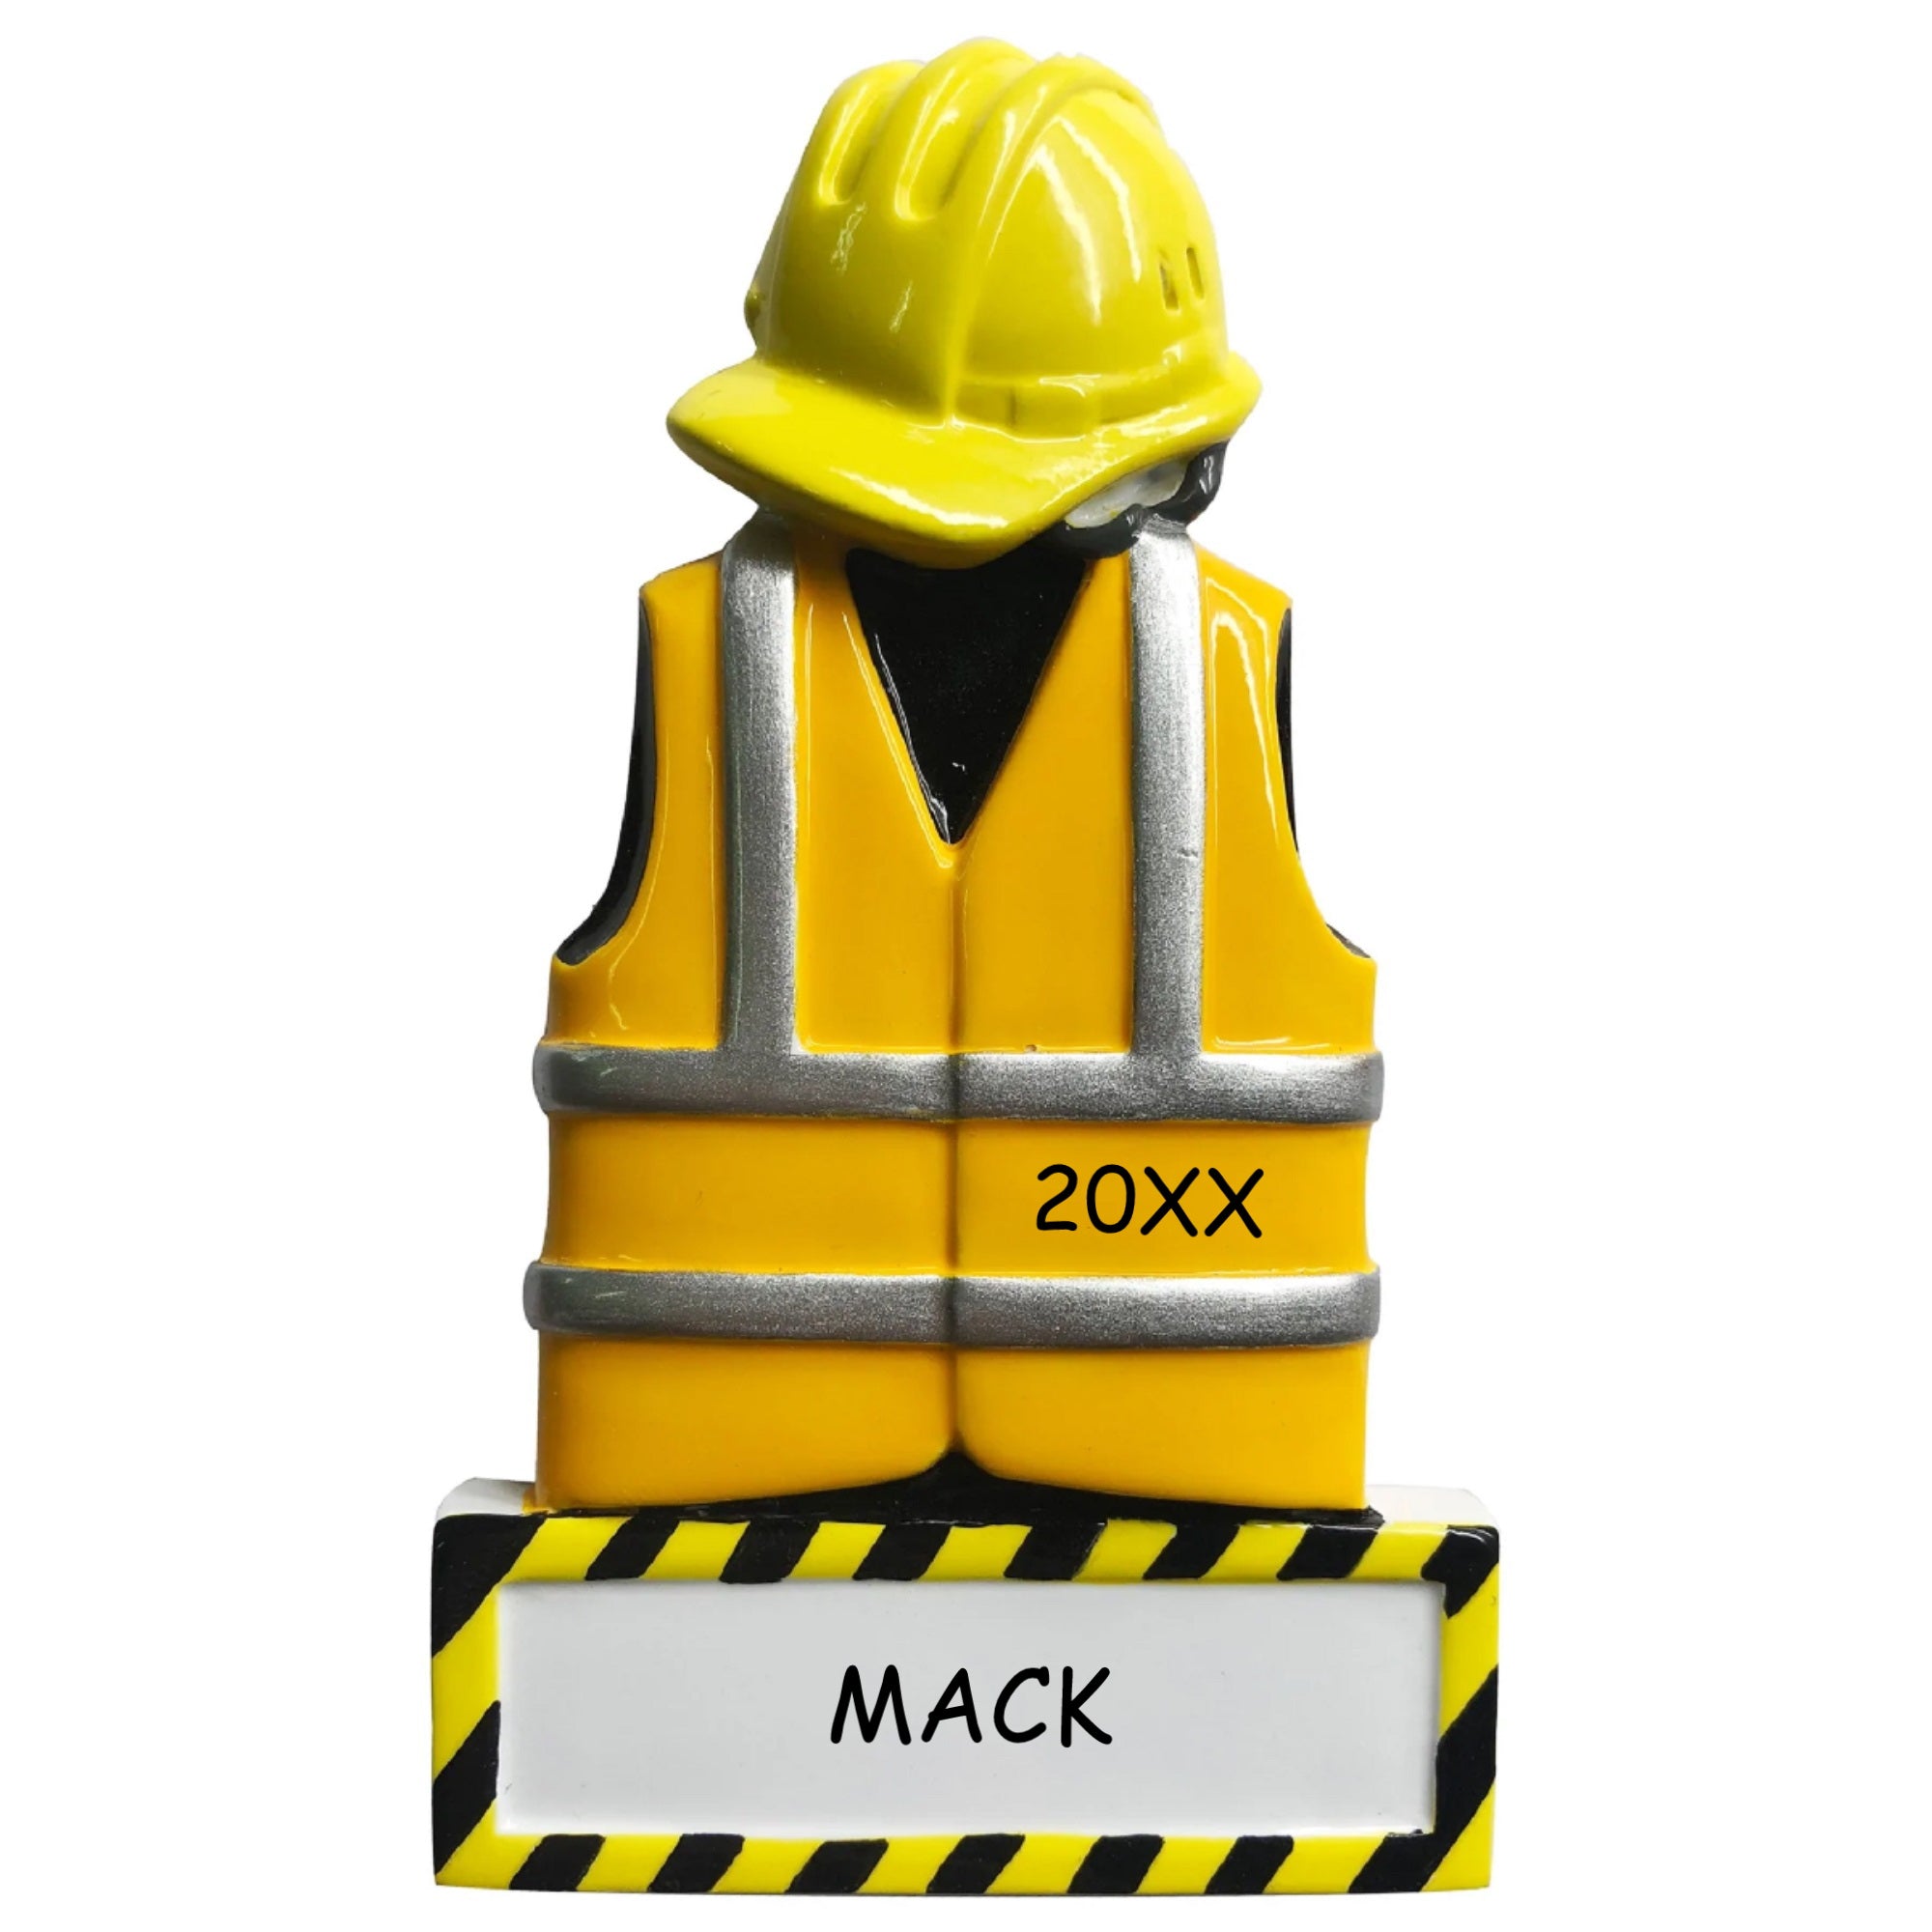 Personalized Construction Worker Christmas Ornament